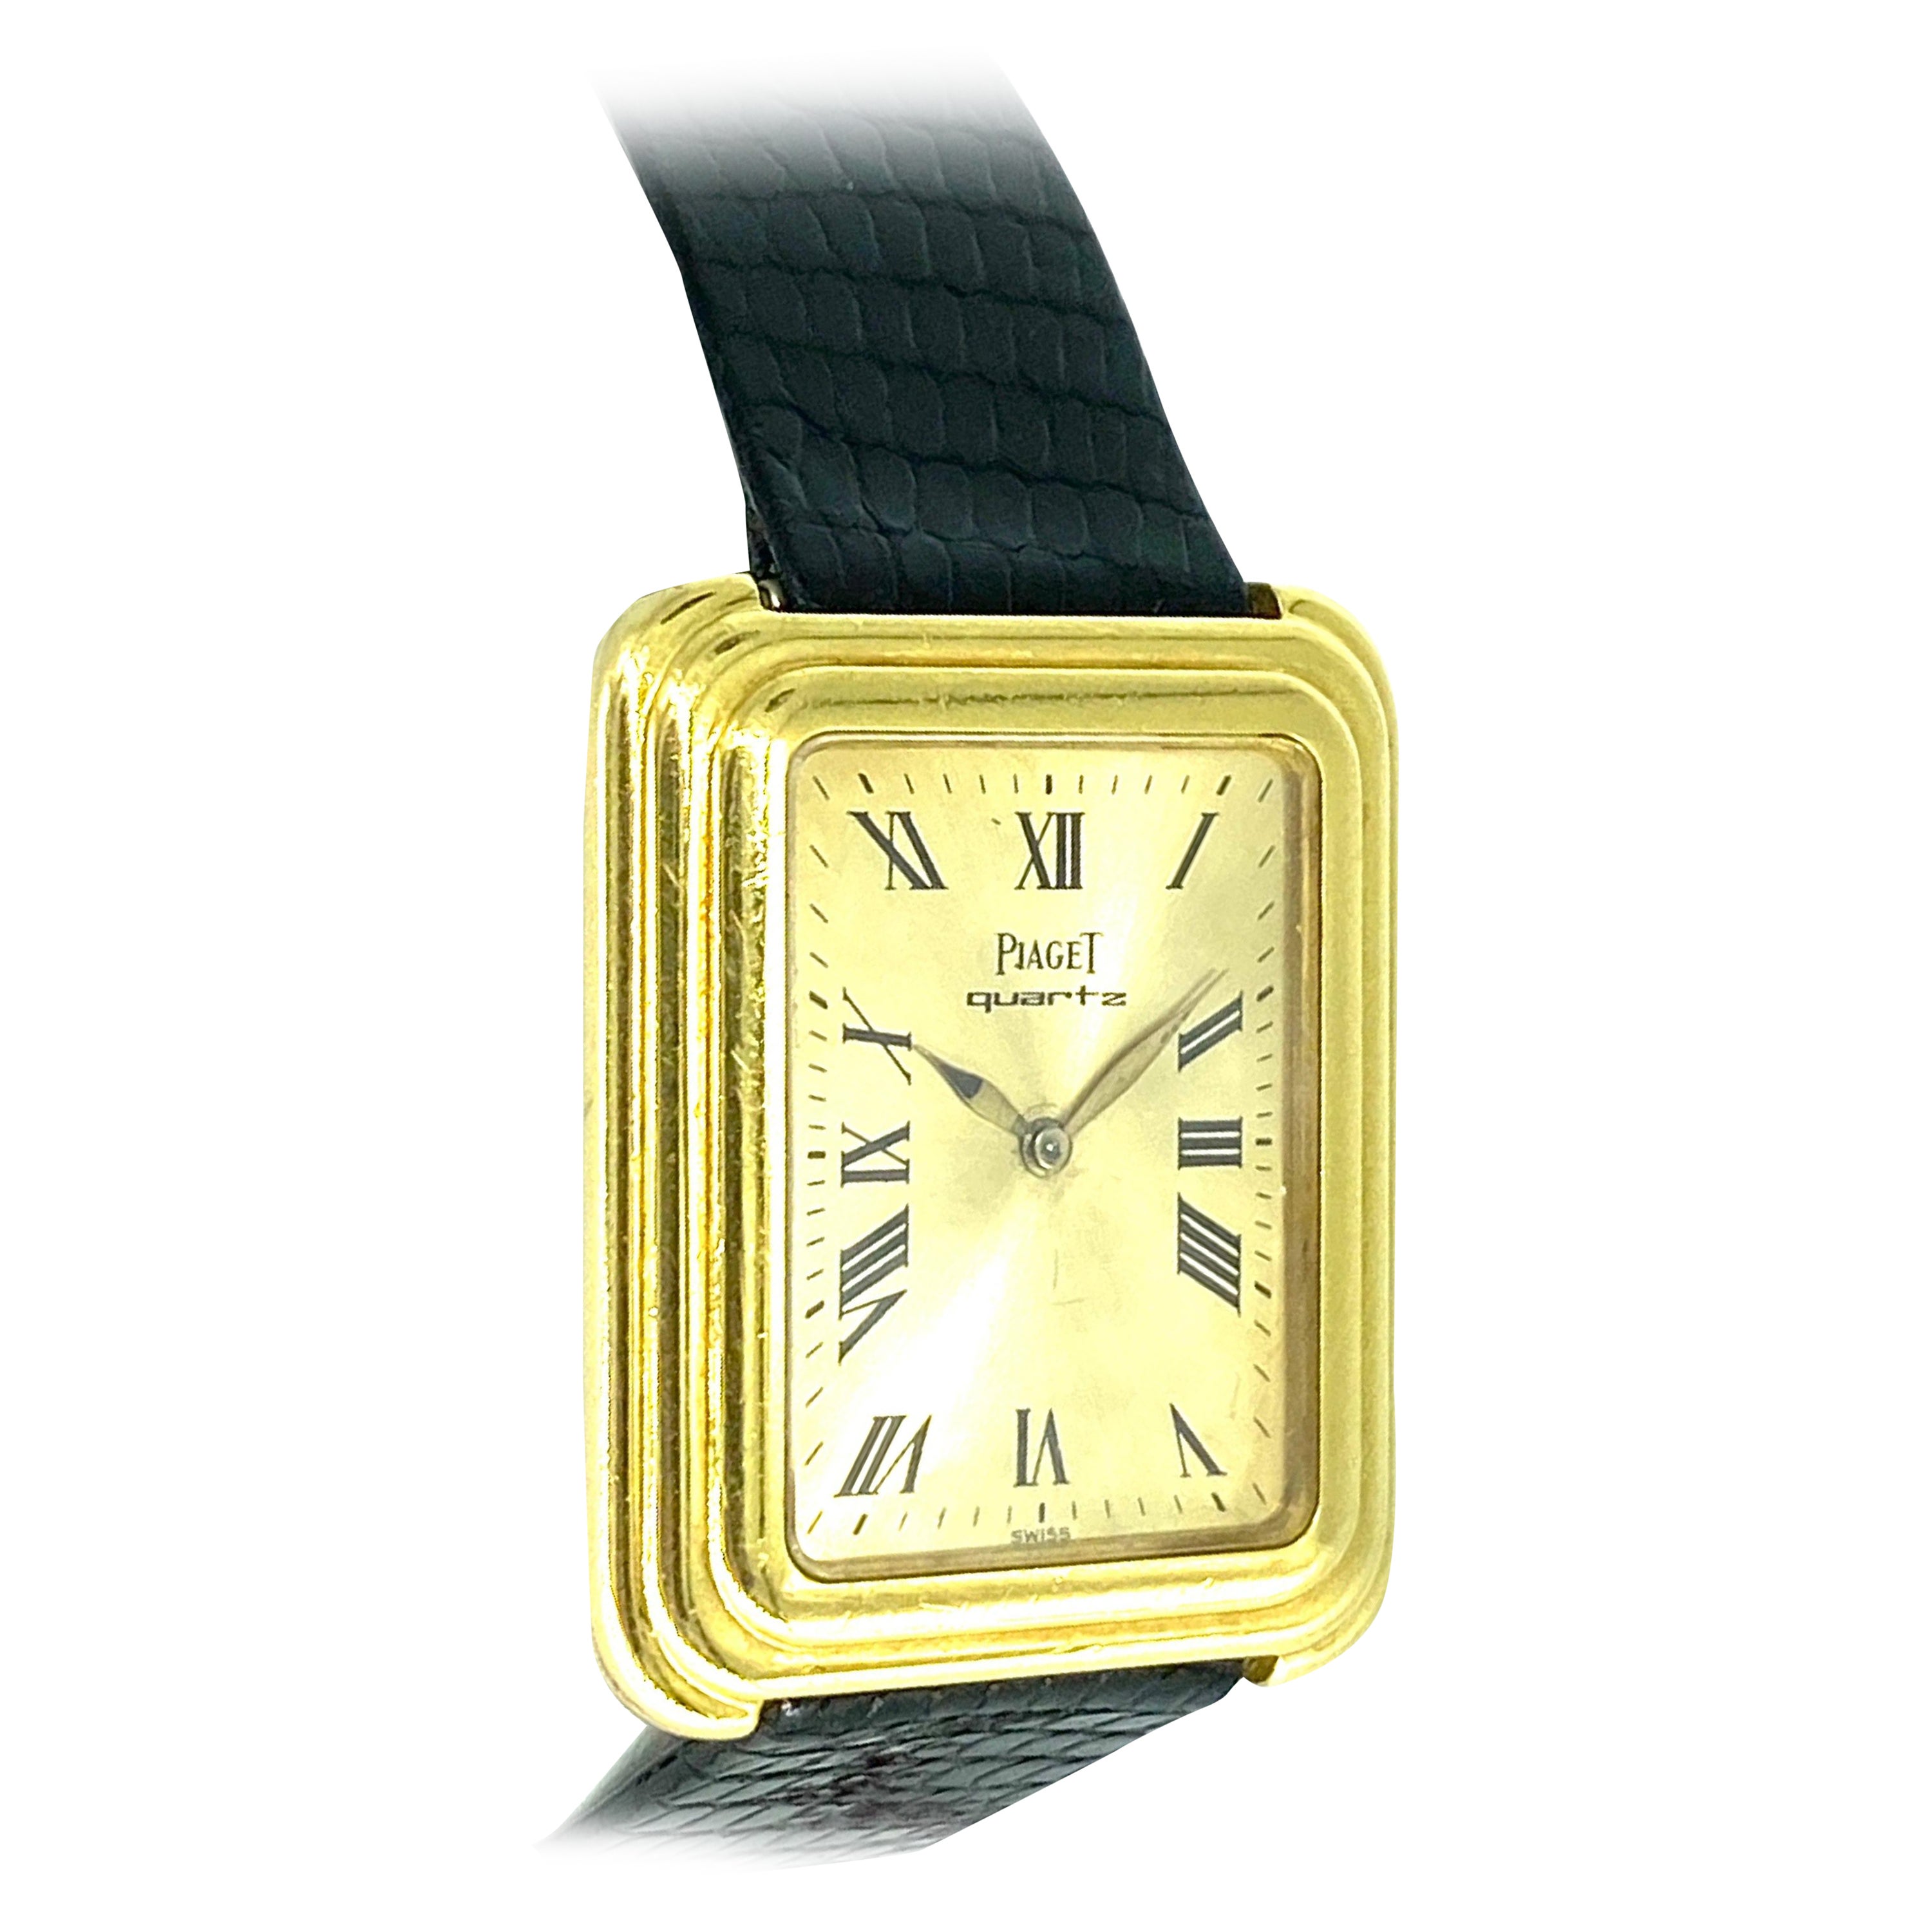 Piaget Stepped Case 18k Solid Gold Watch circa 1980’s